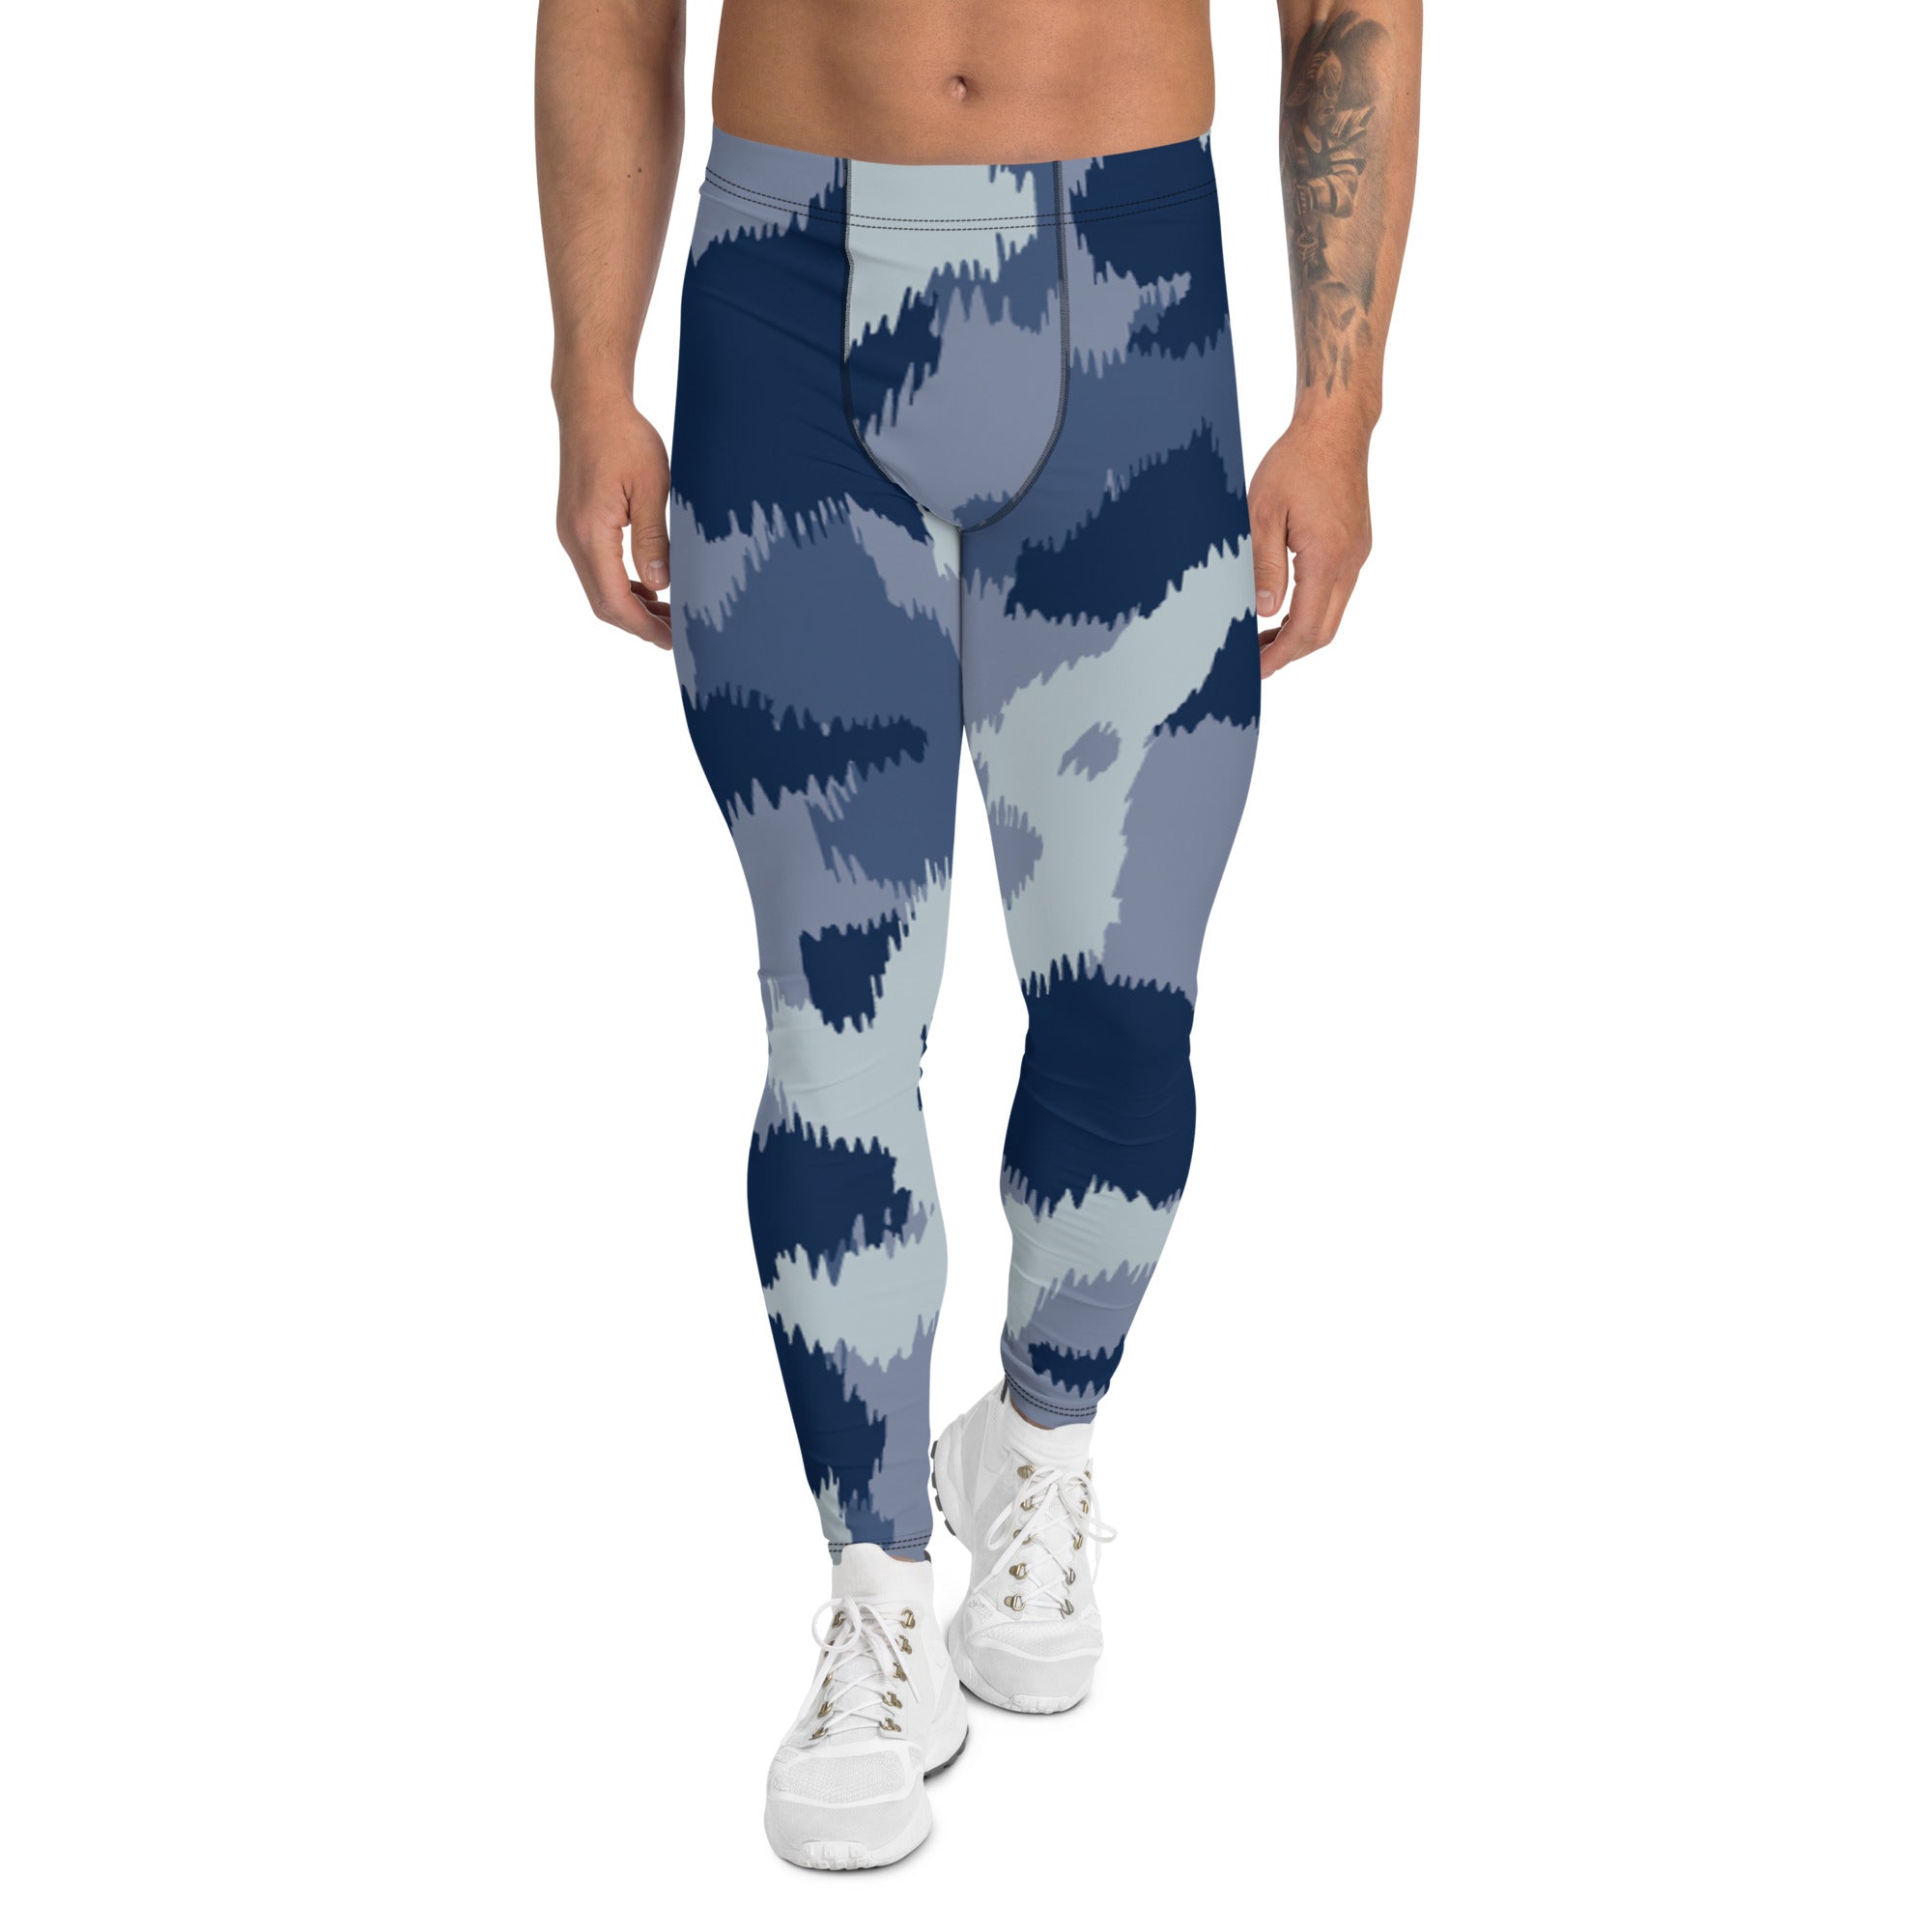 Abstract Blue Men's Leggings, Blue Grey Abstract Designer Print Sexy Meggings Men's Workout Gym Tights Leggings, Men's Compression Tights Pants - Made in USA/ EU/ MX (US Size: XS-3XL) 